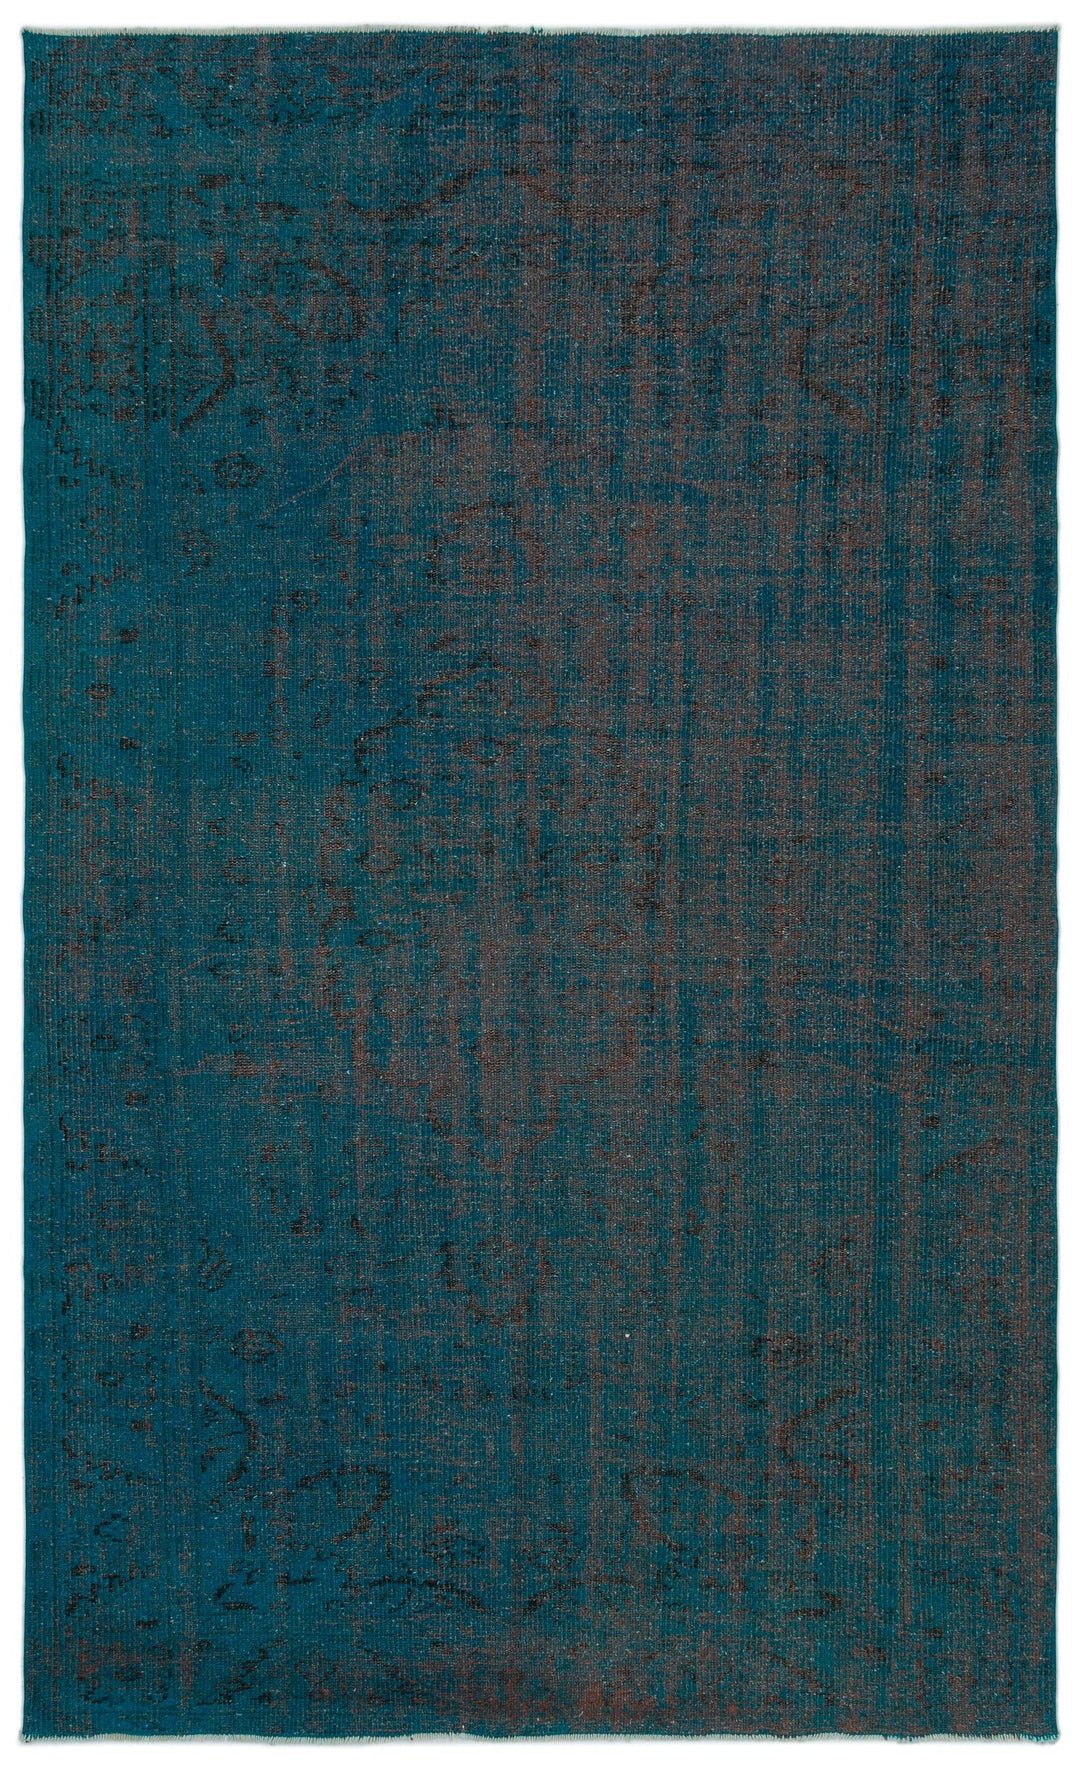 Athens Turquoise Tumbled Wool Hand Woven Carpet 162 x 260